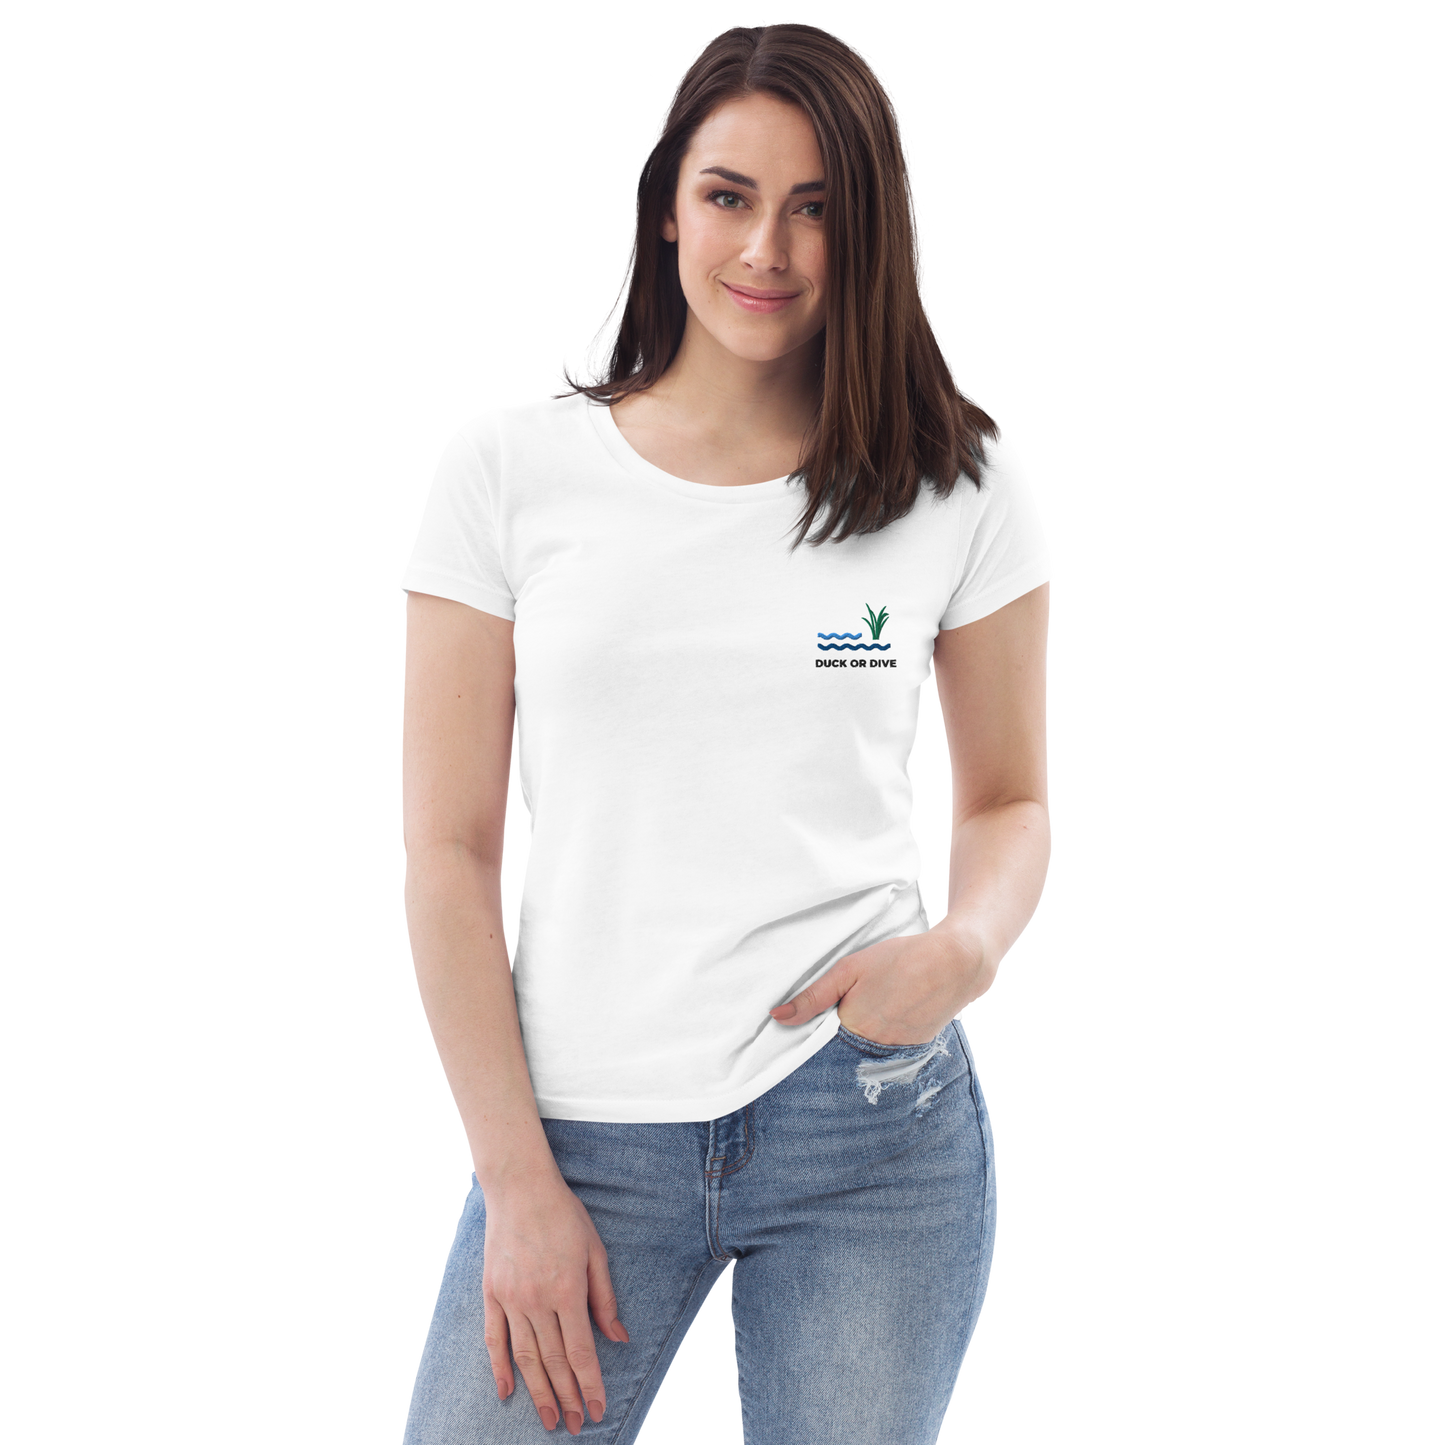 Duck or Dive Embroidered Women's Fitted Eco T-shirt